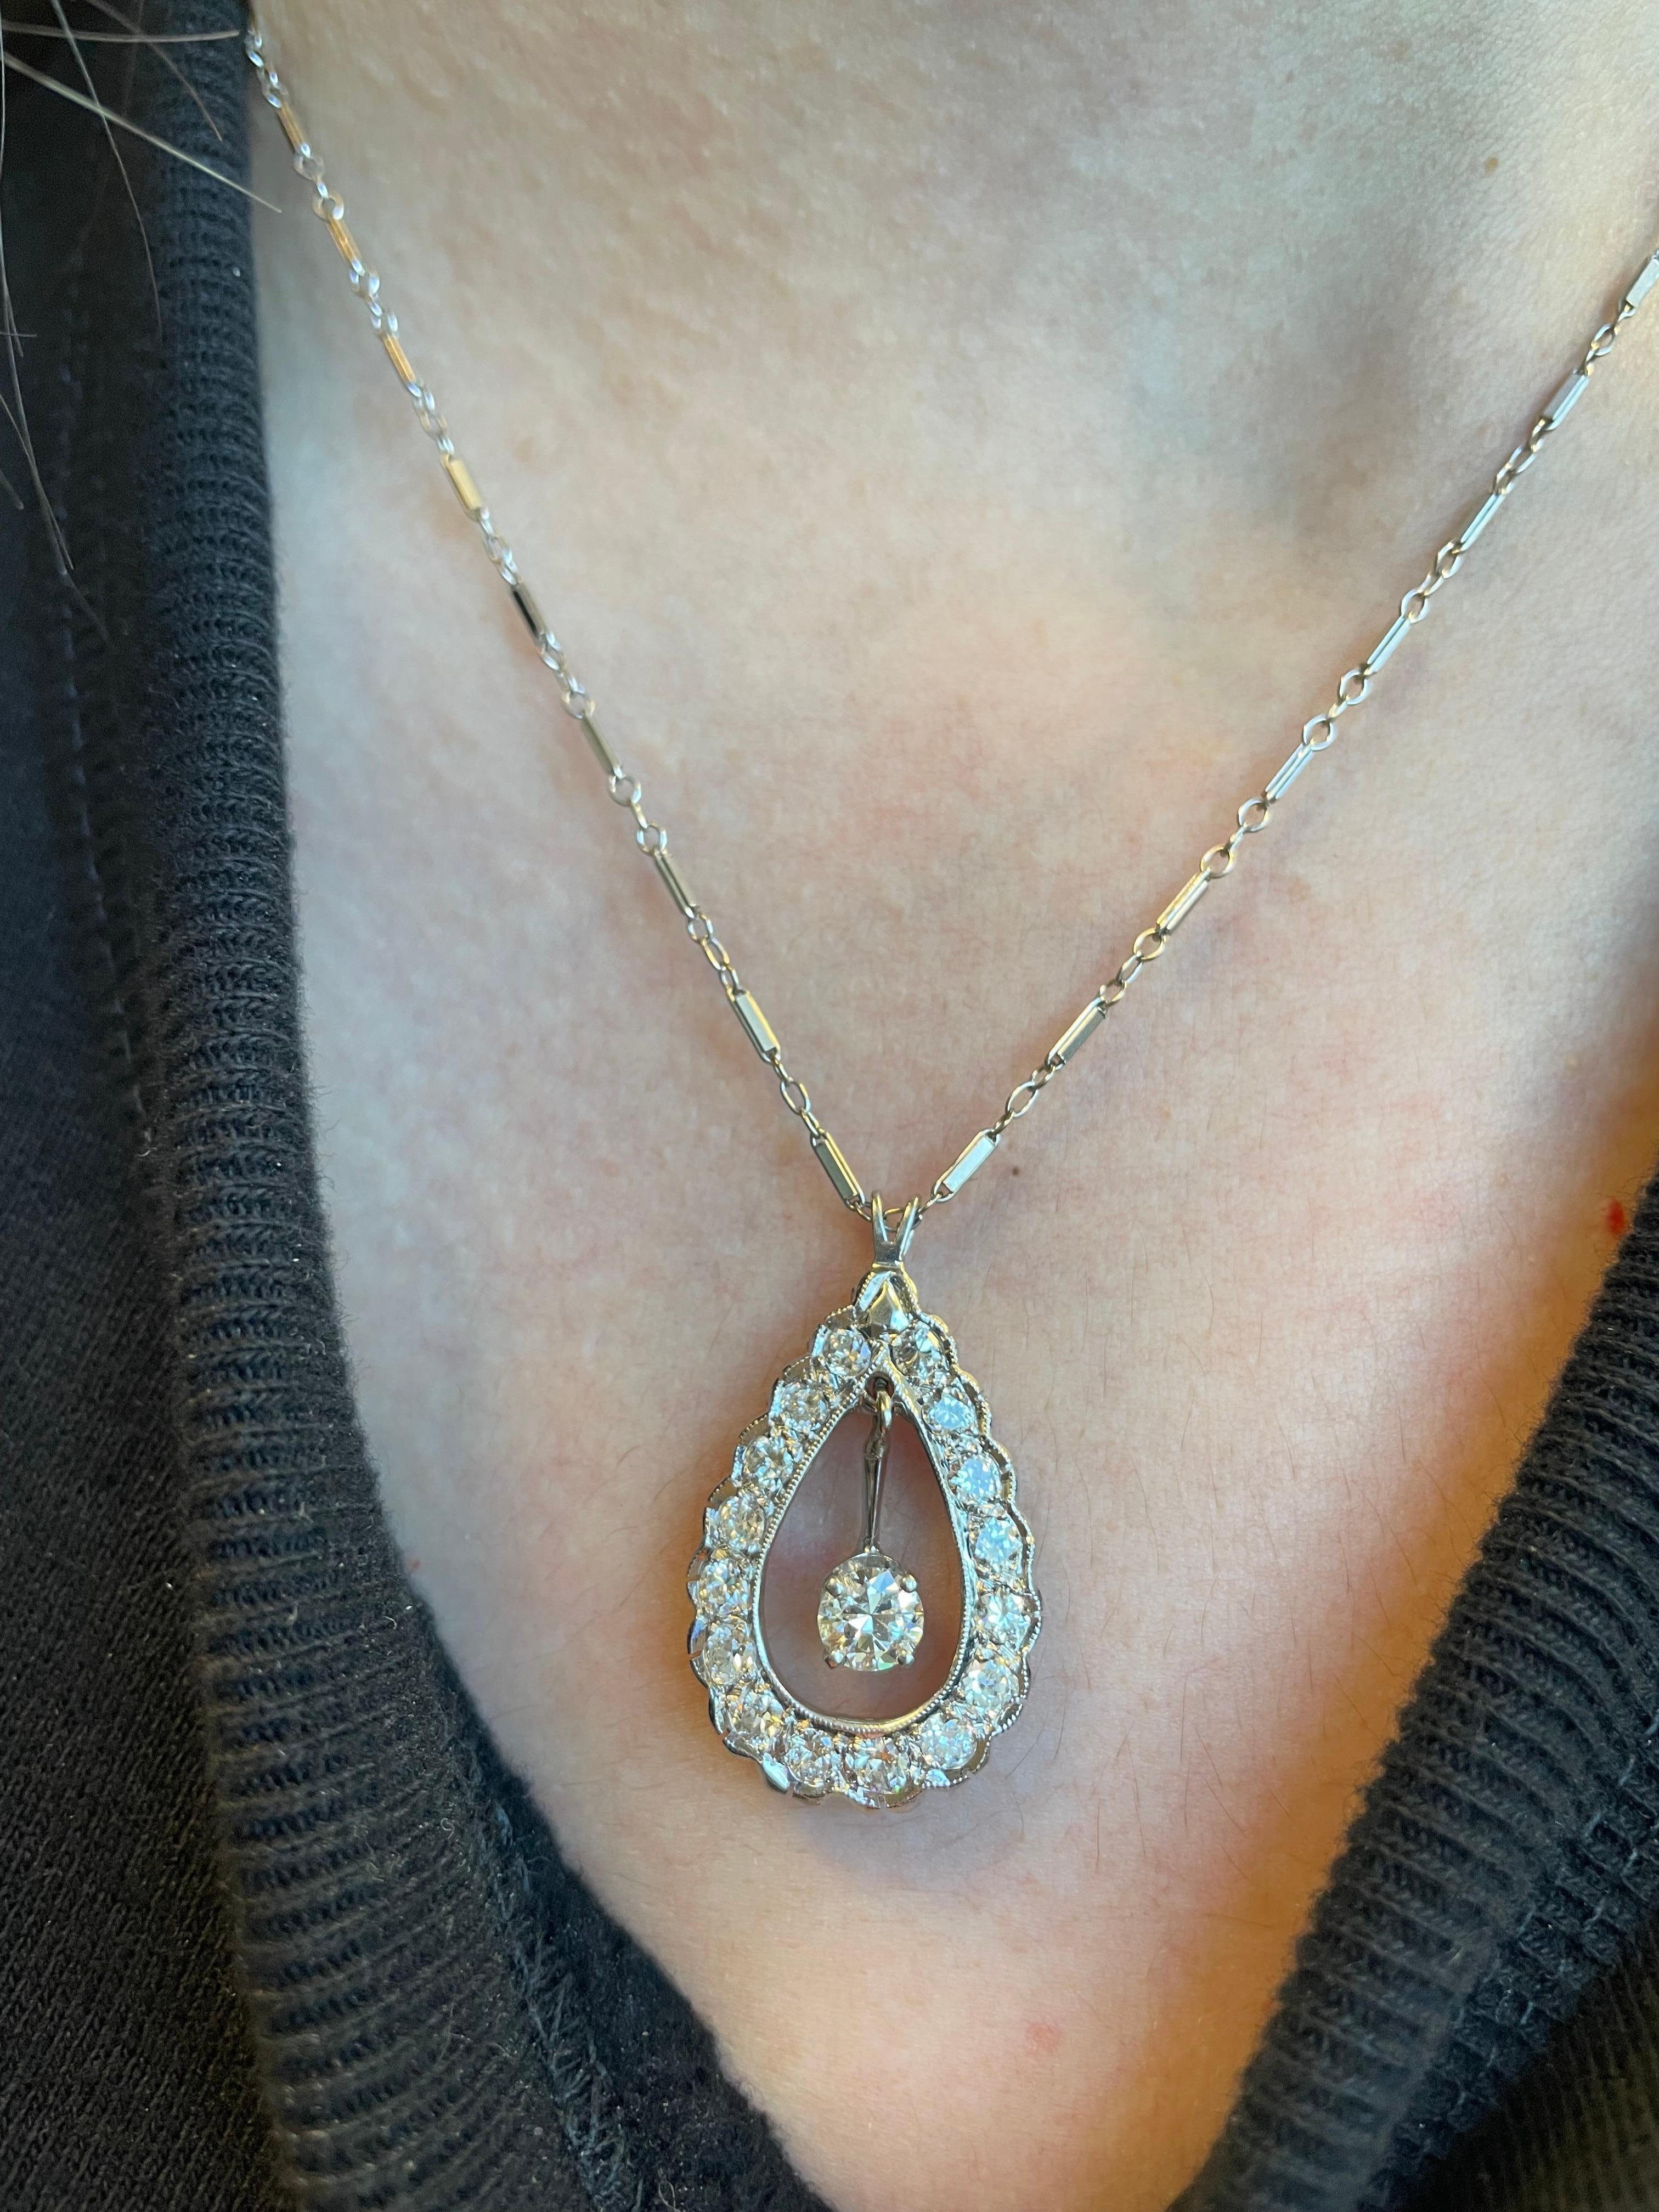 Art Deco inspired diamond pendant with dangling diamond.
Approximately 1.50 carats of round brilliant diamonds, G/H color and VS2/SI1 clarity. Center stone approximately 0.50 carats. 14k white gold.
Accommodated with an up to date appraisal by a GIA